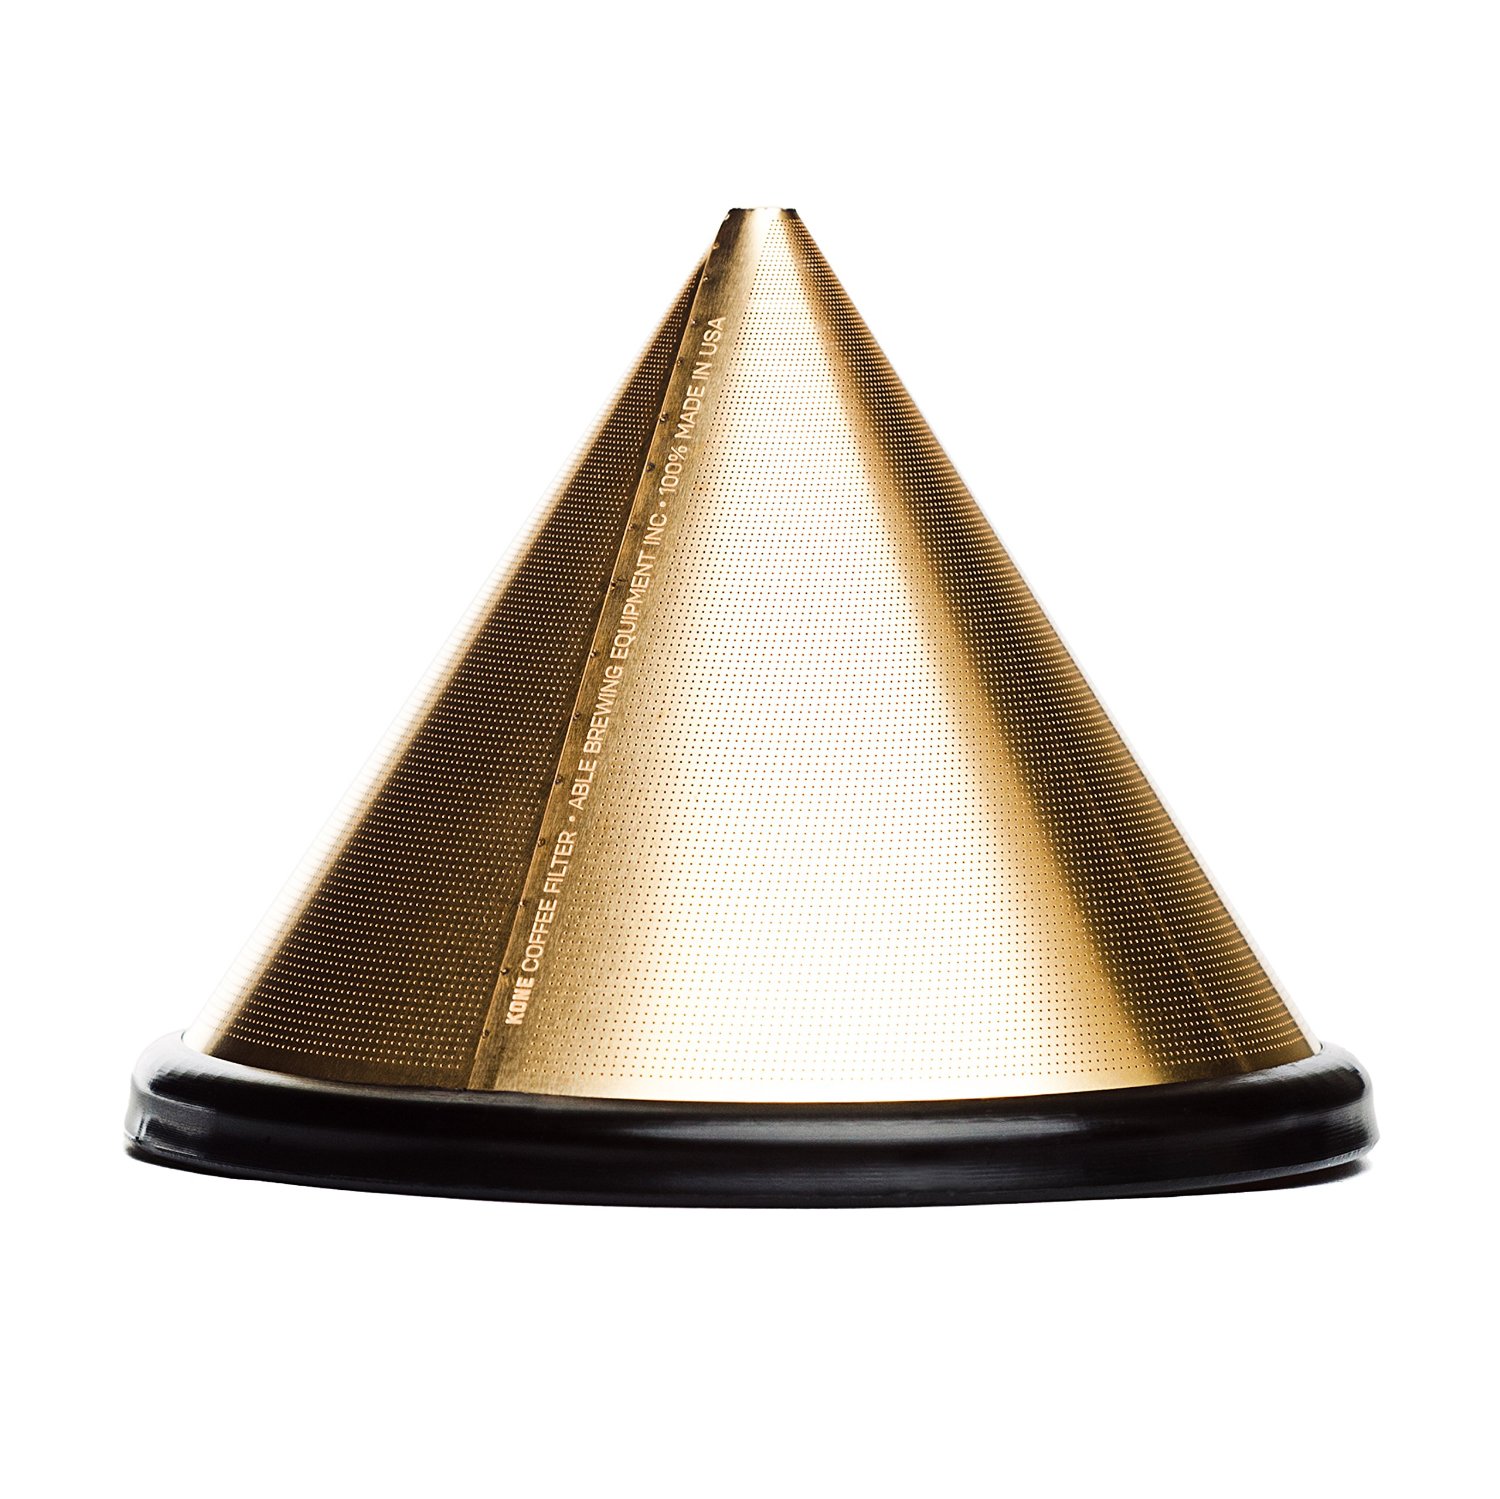 Gold stainless steel coffee filter -XK002